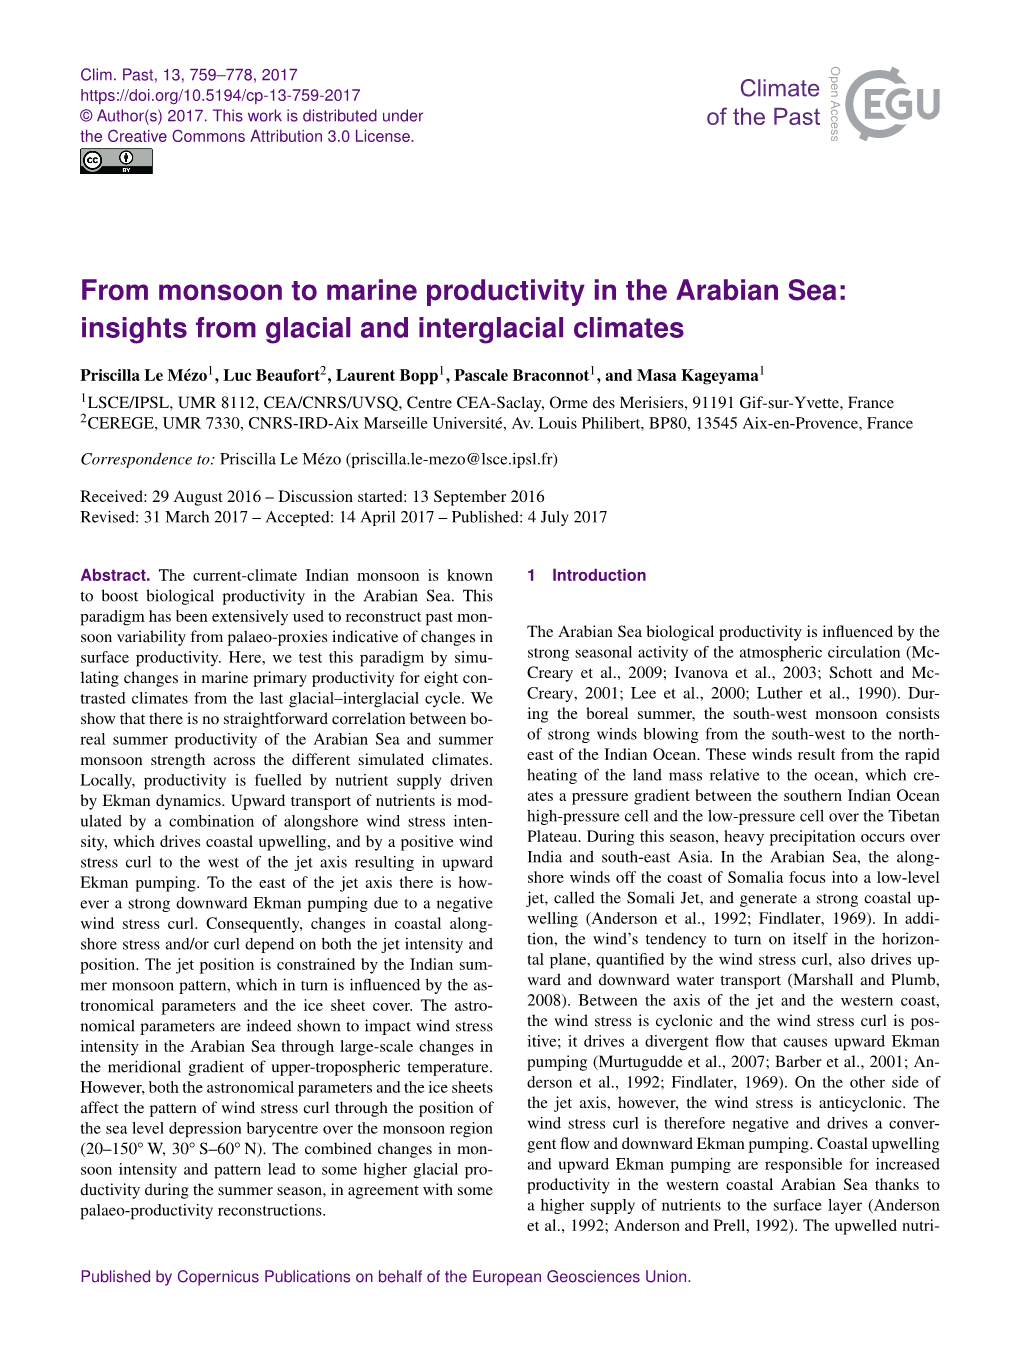 From Monsoon to Marine Productivity in the Arabian Sea: Insights from Glacial and Interglacial Climates